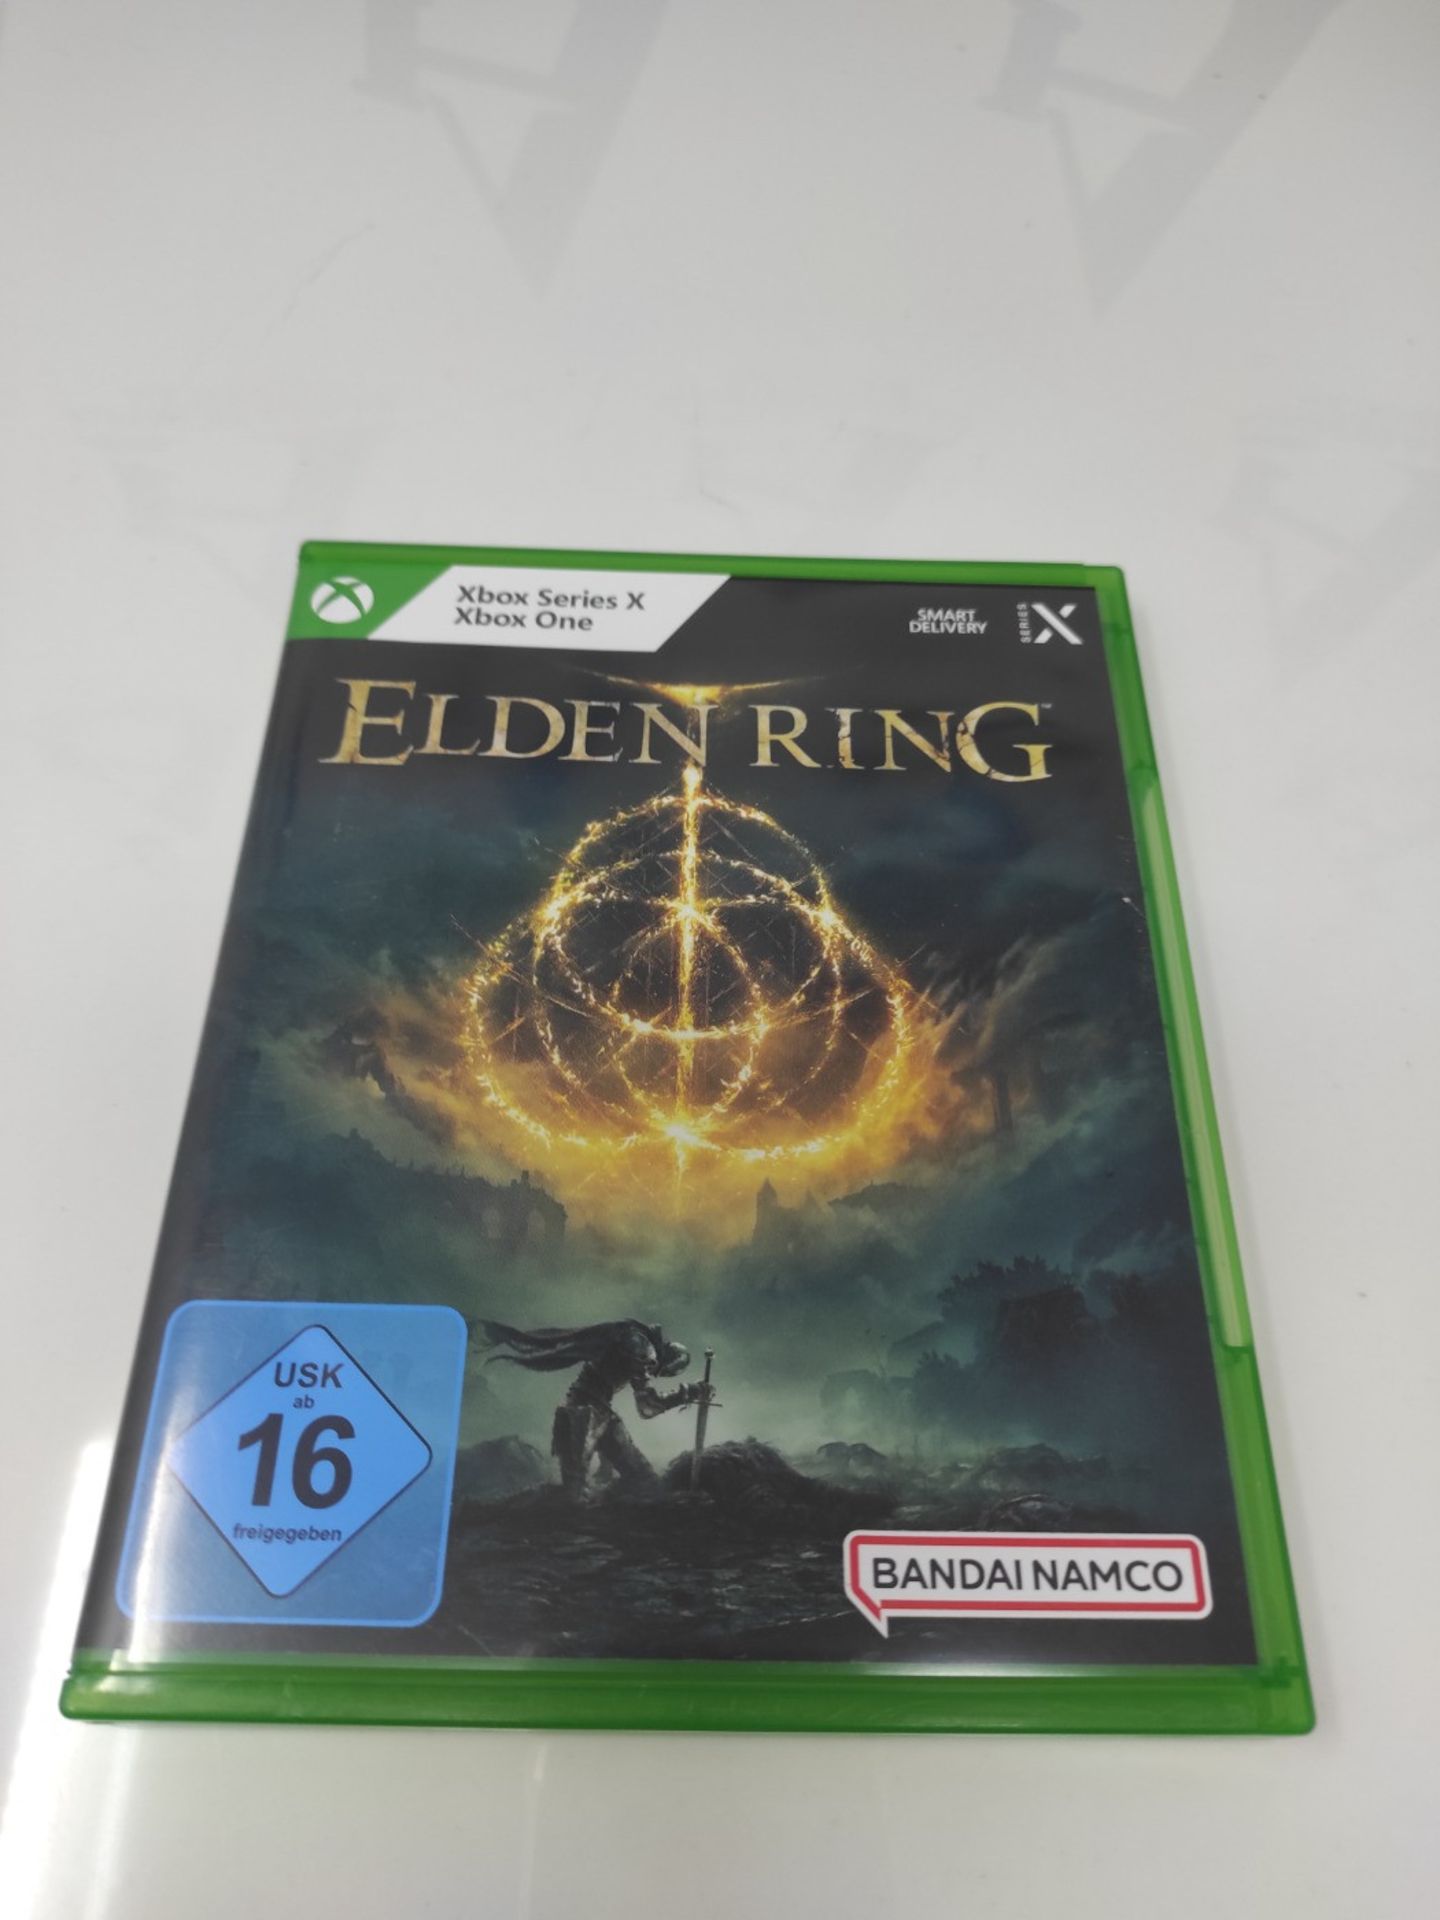 ELDEN RING - Standard Edition [Xbox One] | Free upgrade to Xbox Series X - Image 2 of 3